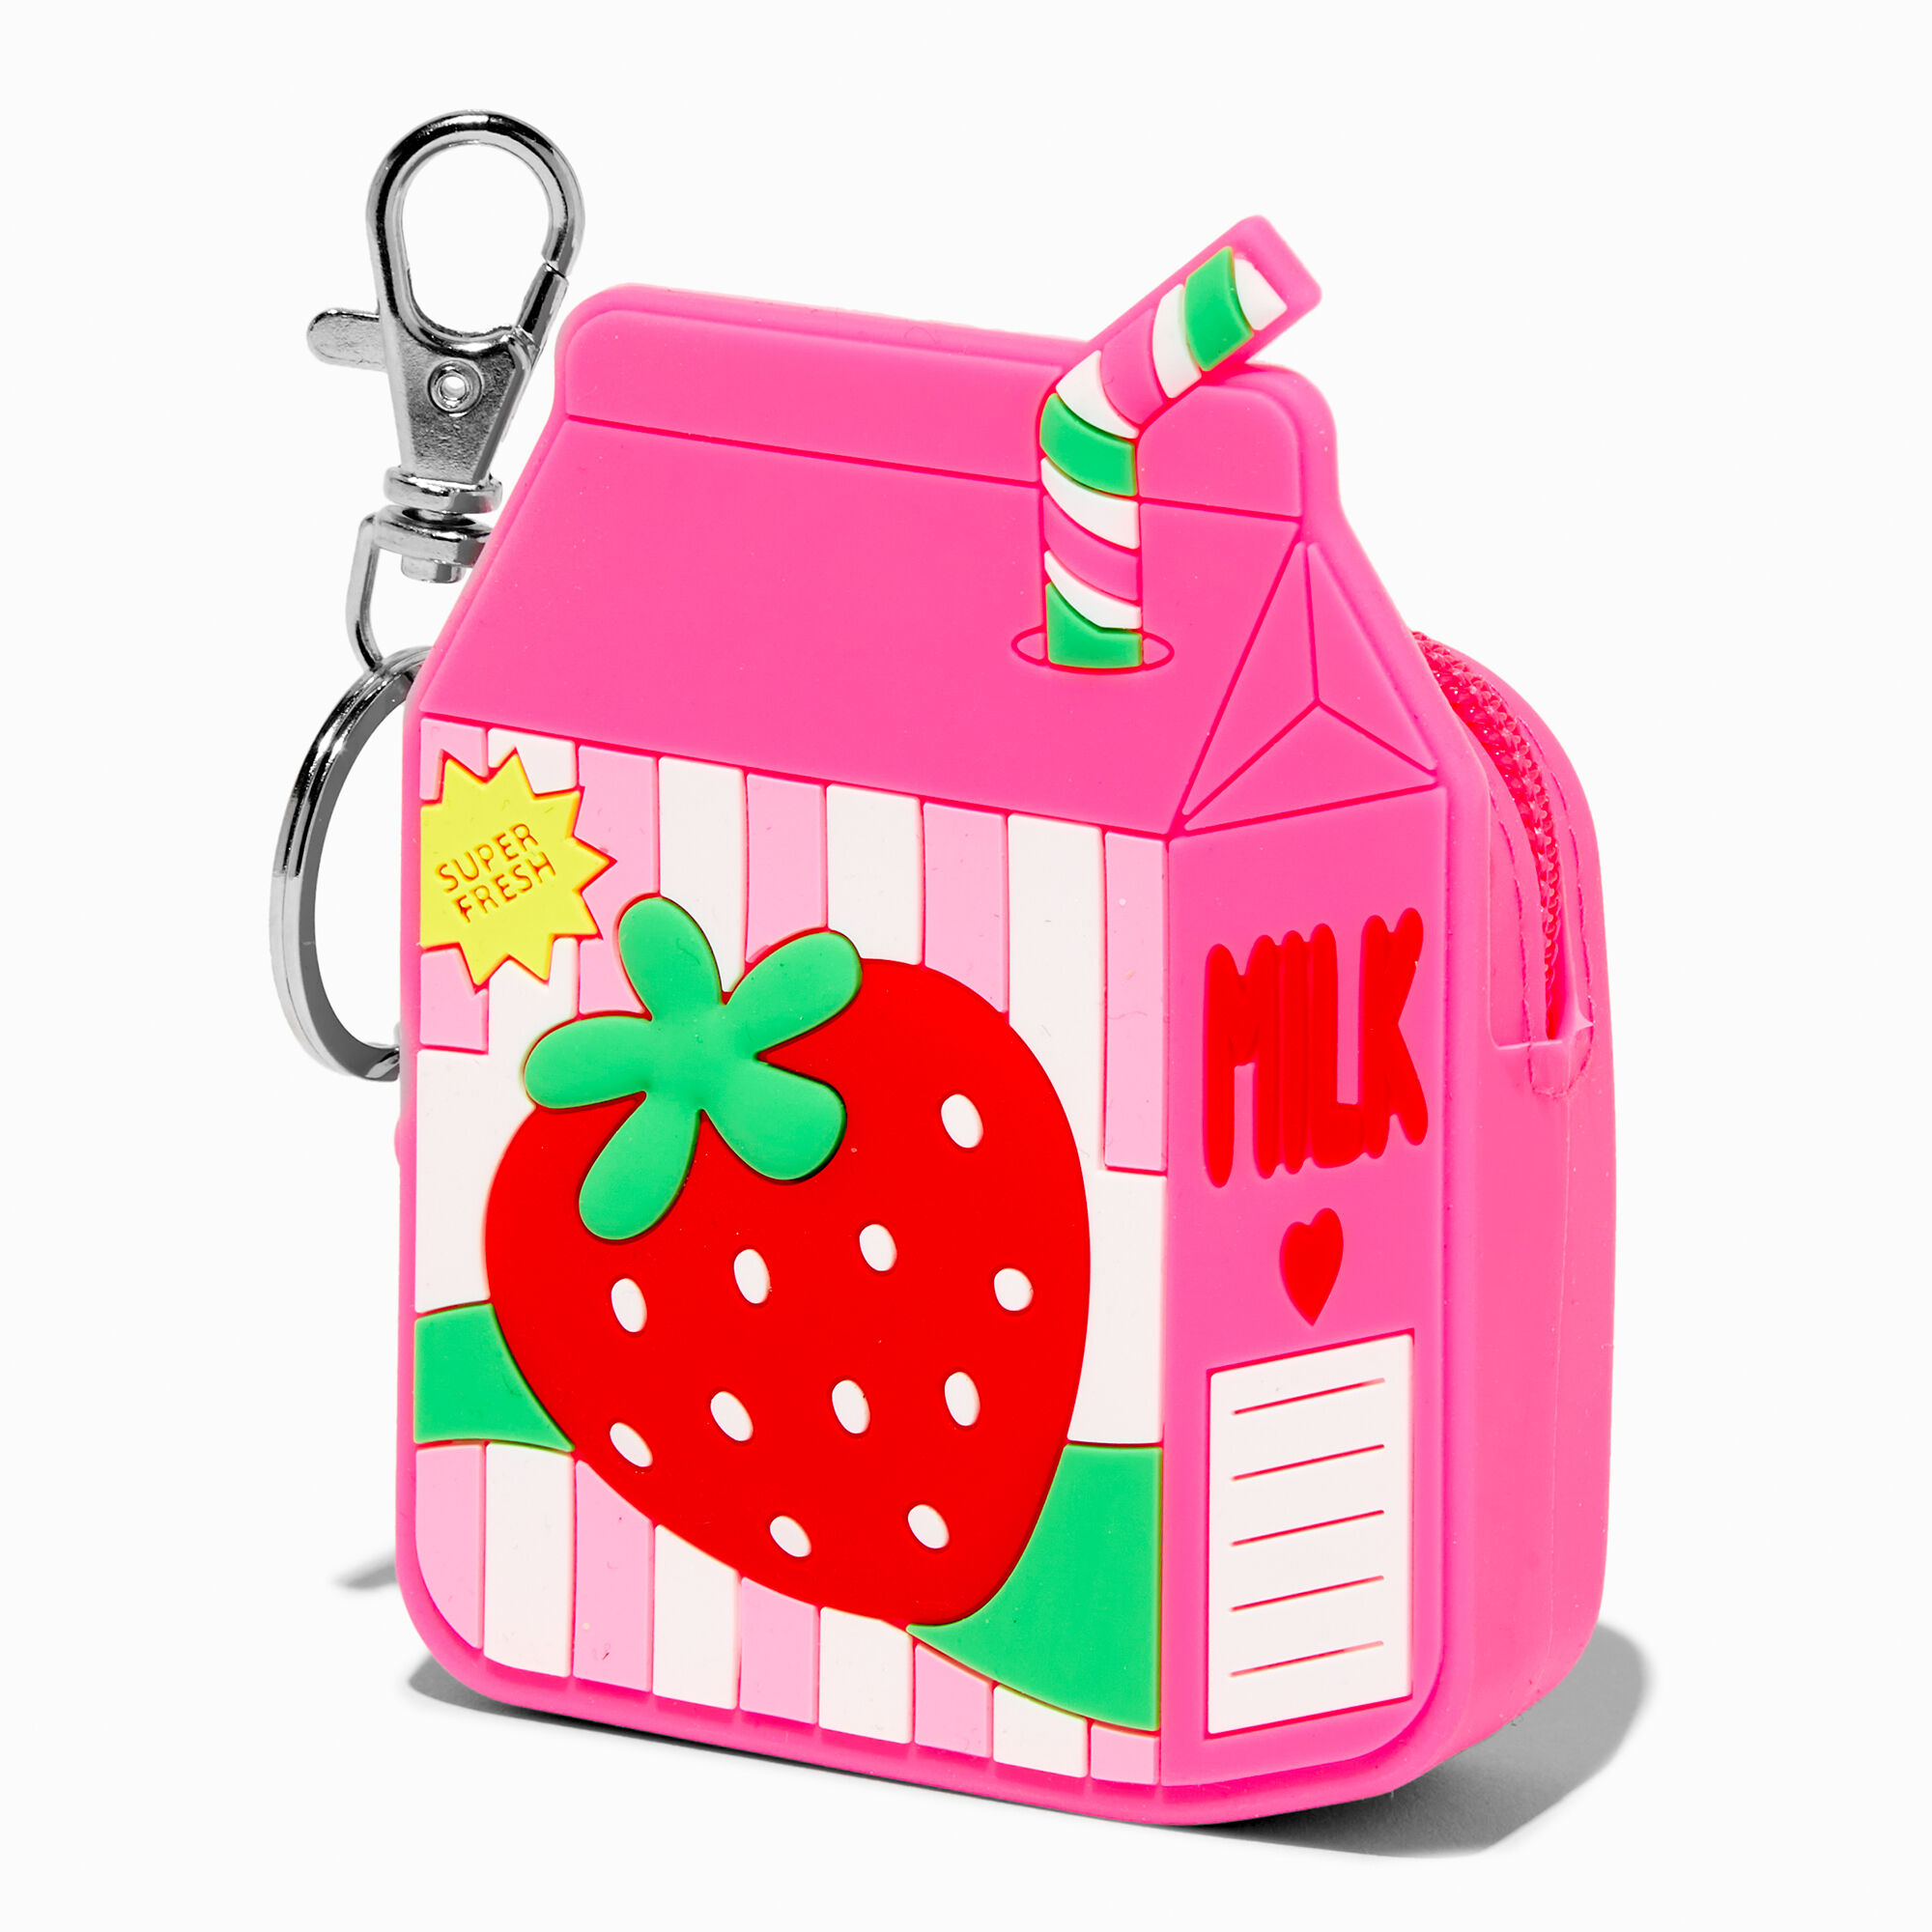 View Claires Strawberry Milk Jelly Coin Purse Keyring information